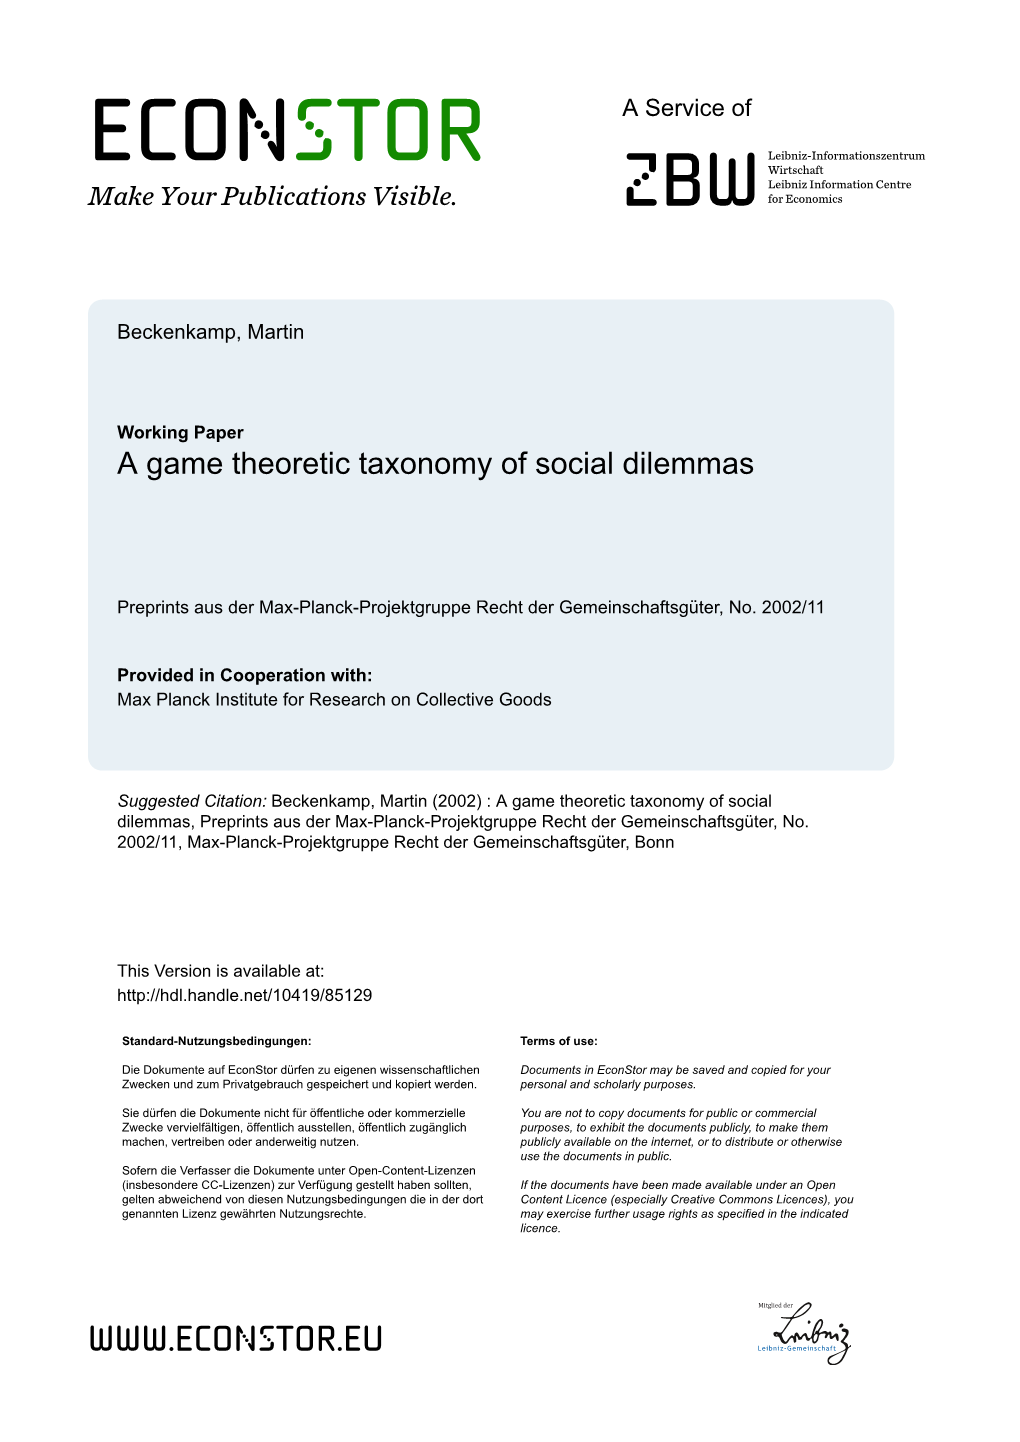 A Game Theoretic Taxonomy of Social Dilemmas